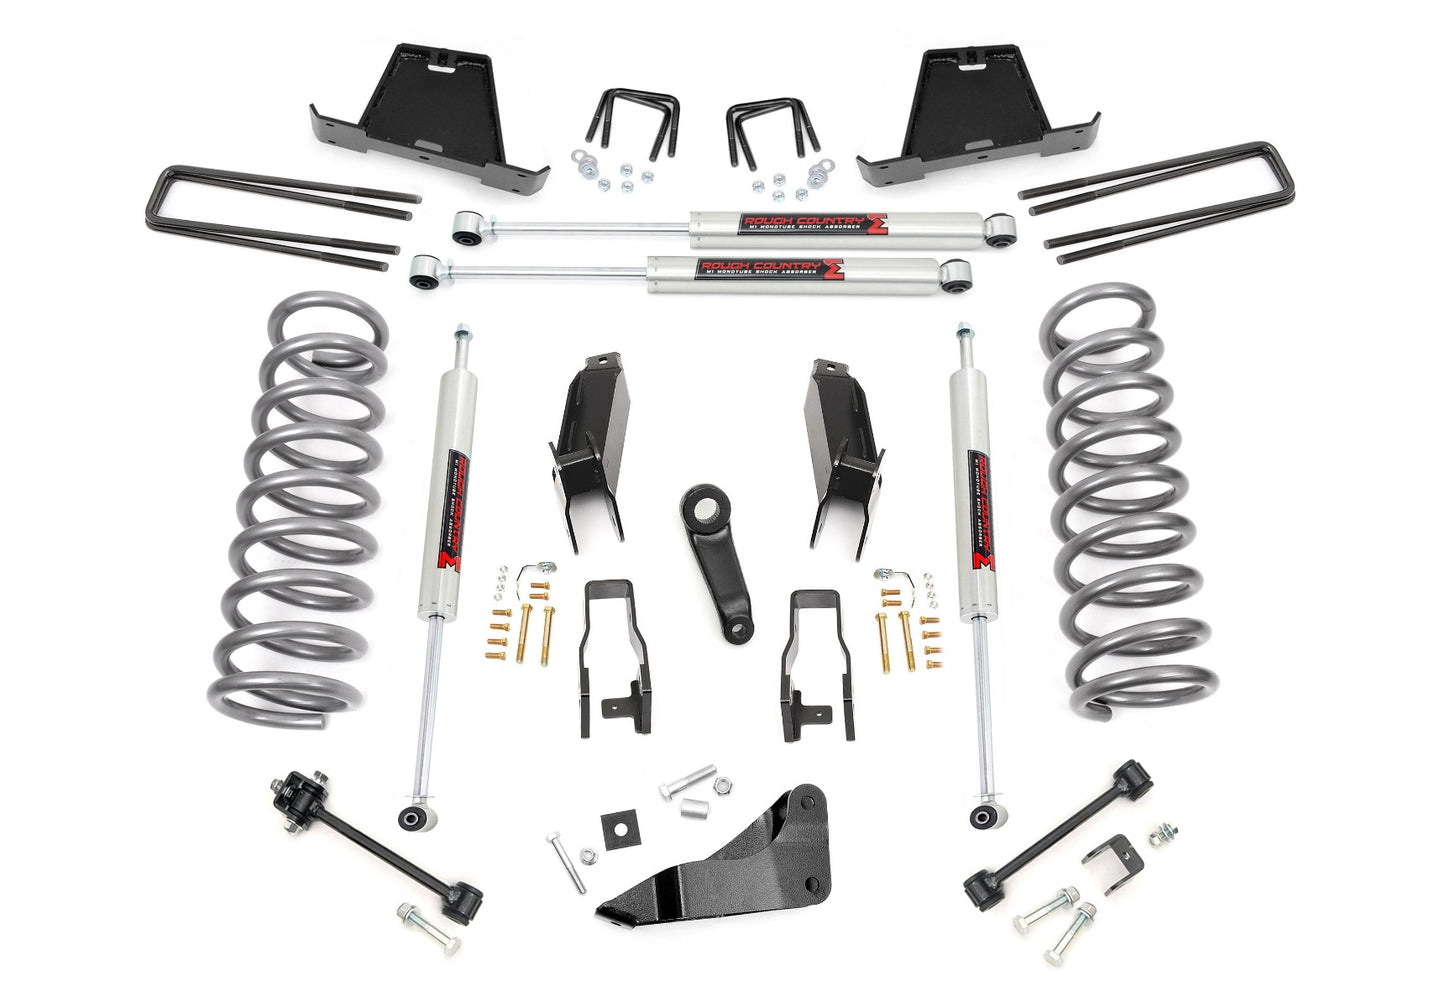 Rough Country (39140) 5 Inch Lift Kit | Gas | M1 | Dodge 2500/Ram 3500 4WD (2003-2007)